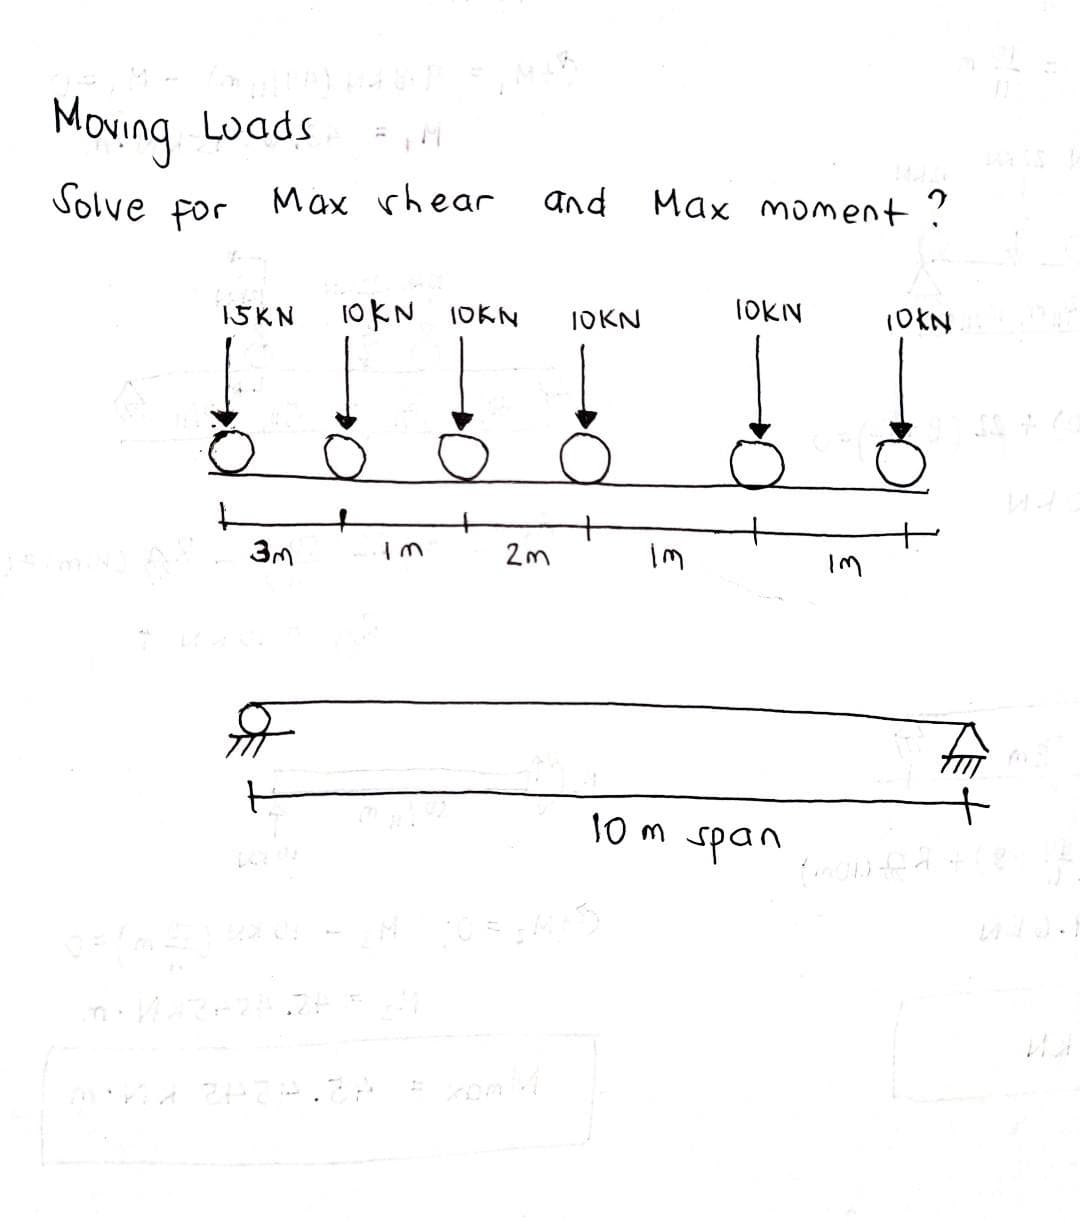 Mouing
Luads
Solve for
Max rhear
and
Max moment?
IOKN
15KN
10KN 10KN
IOKN
3M
Im
分
10m span
